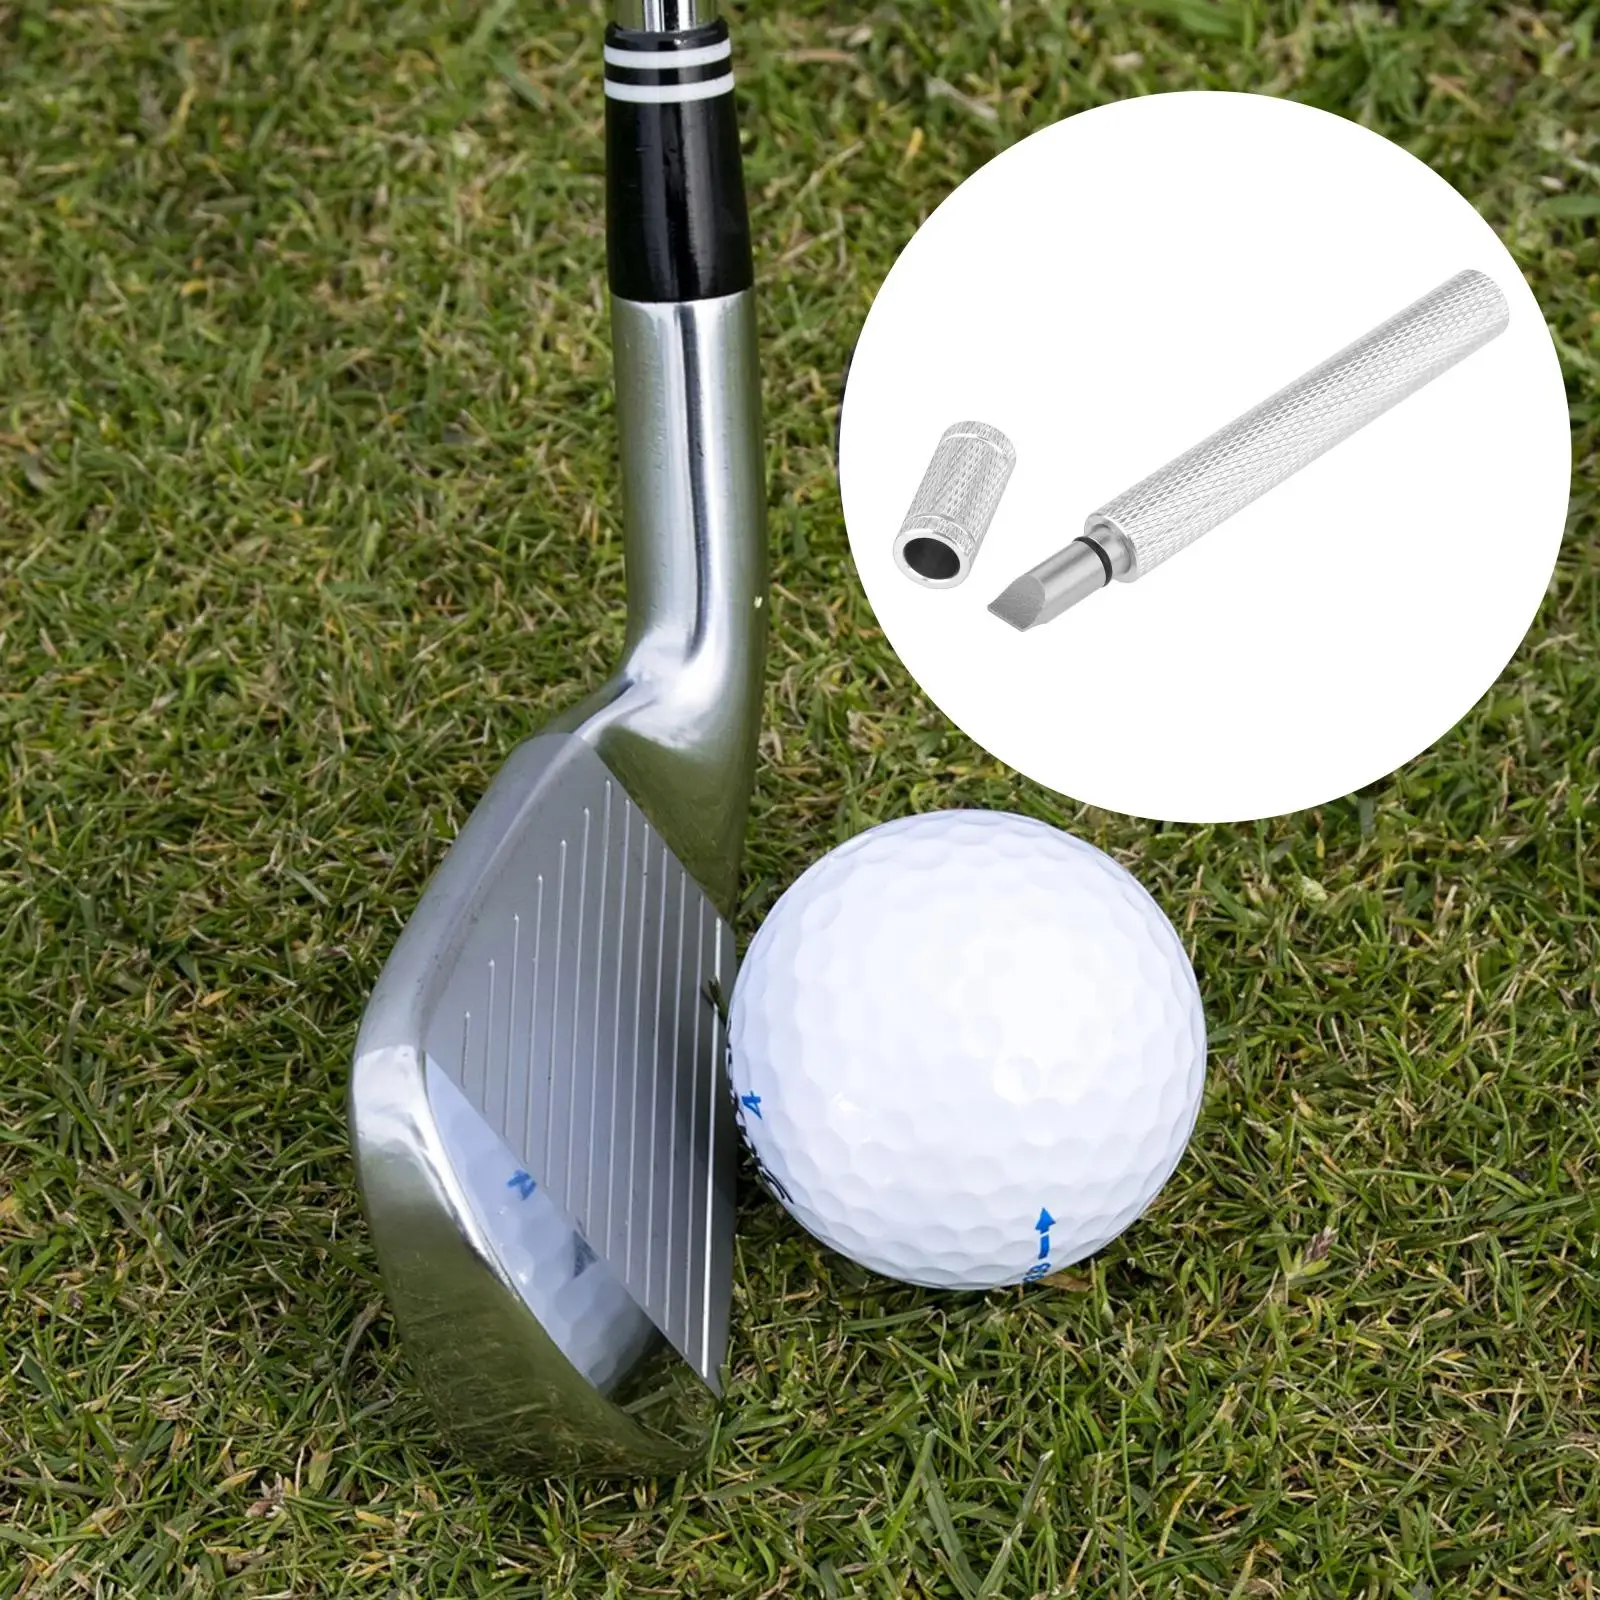 Golf Club Groove Sharpener Cleaner Repair Grooving Tool Golf Improves Backspin & Ball Control on your Putter